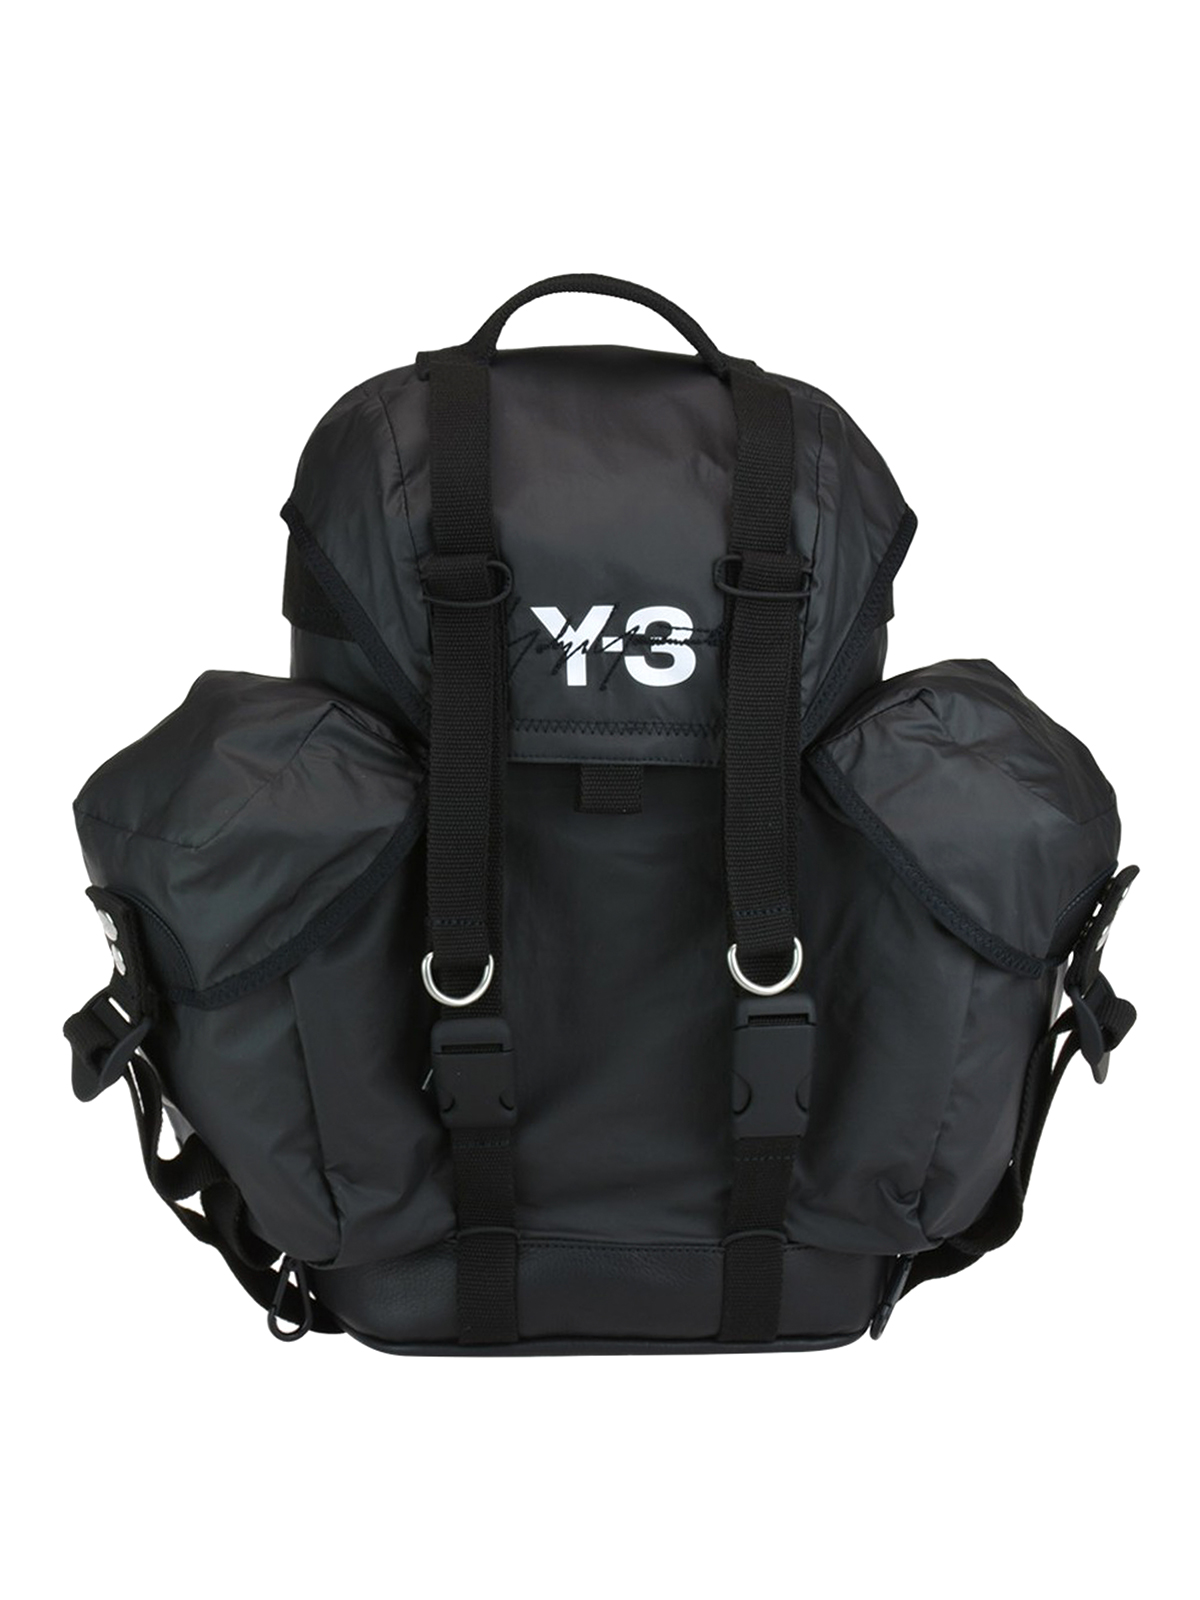 Backpacks Adidas Y-3 - XS Utility black backpack - DY0513